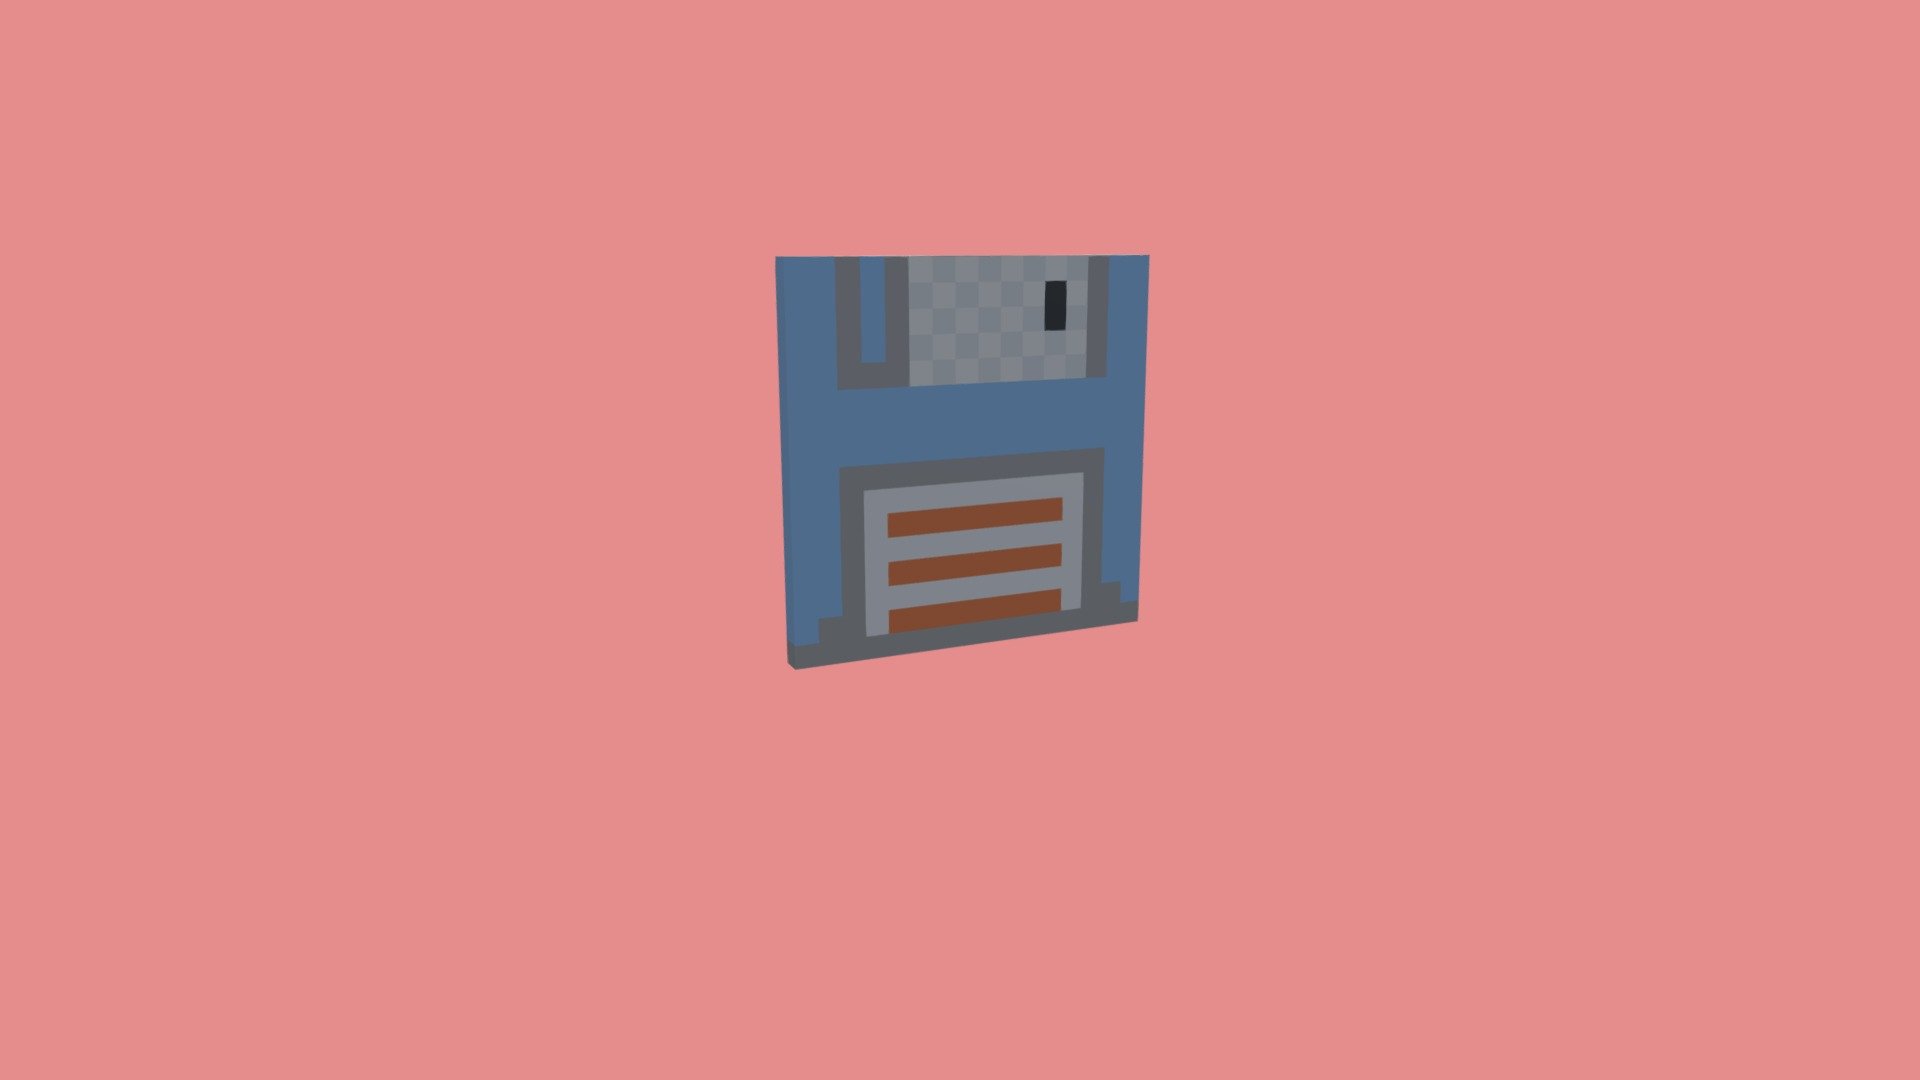 [Low Poly] Floppy Disk